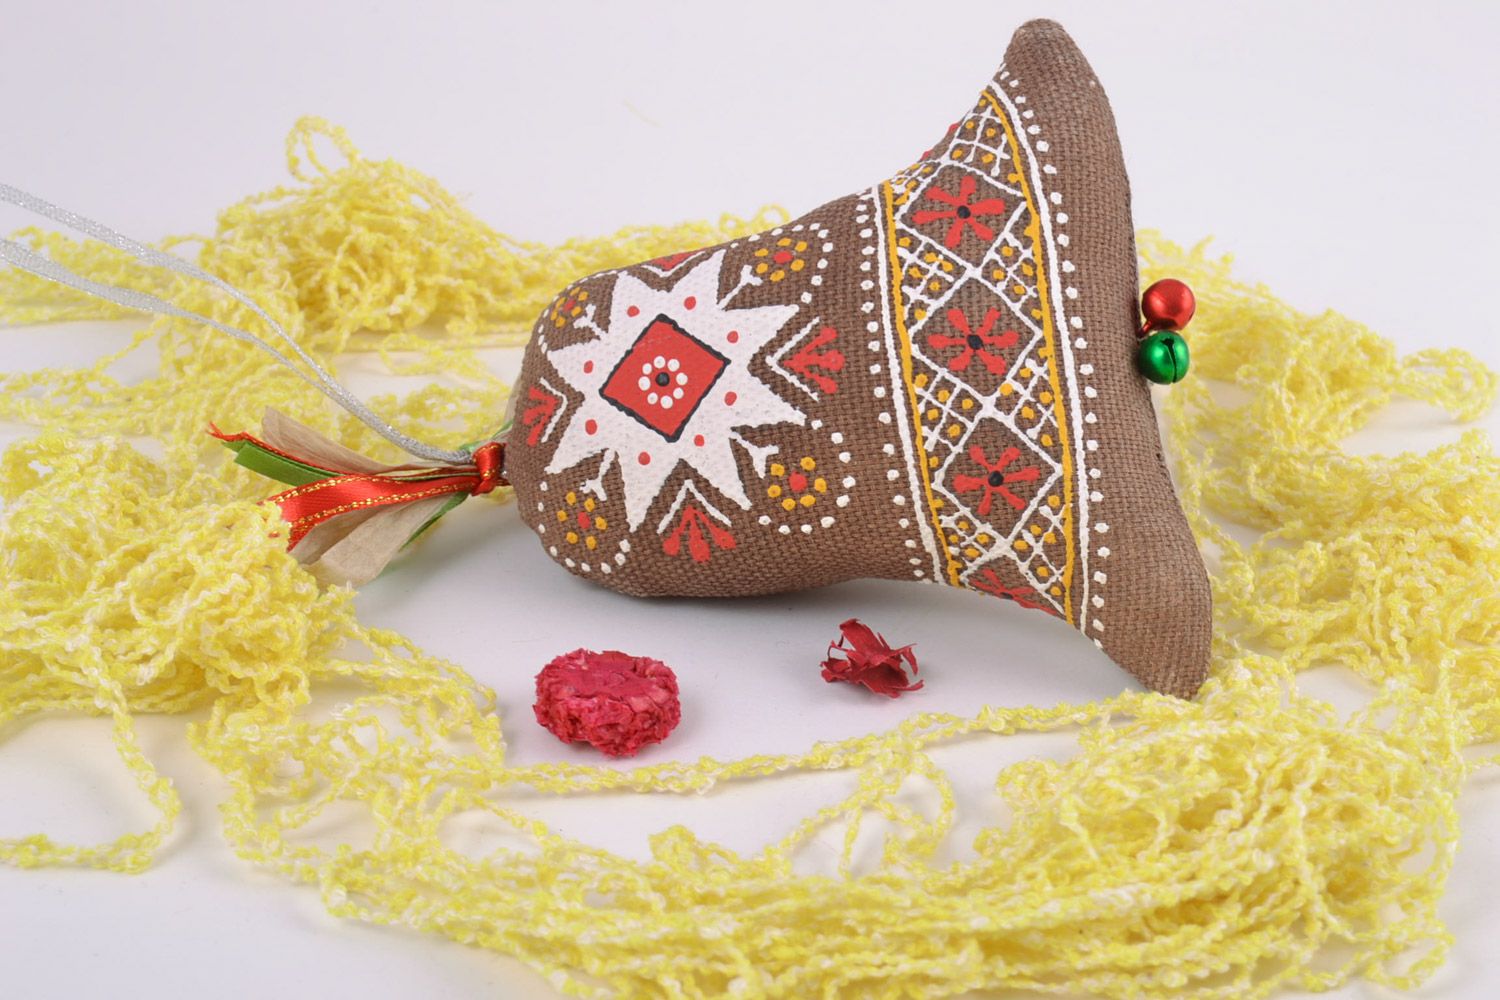 Homemade decorative fragrant soft bell sewn of fabric and painted with ornaments photo 1